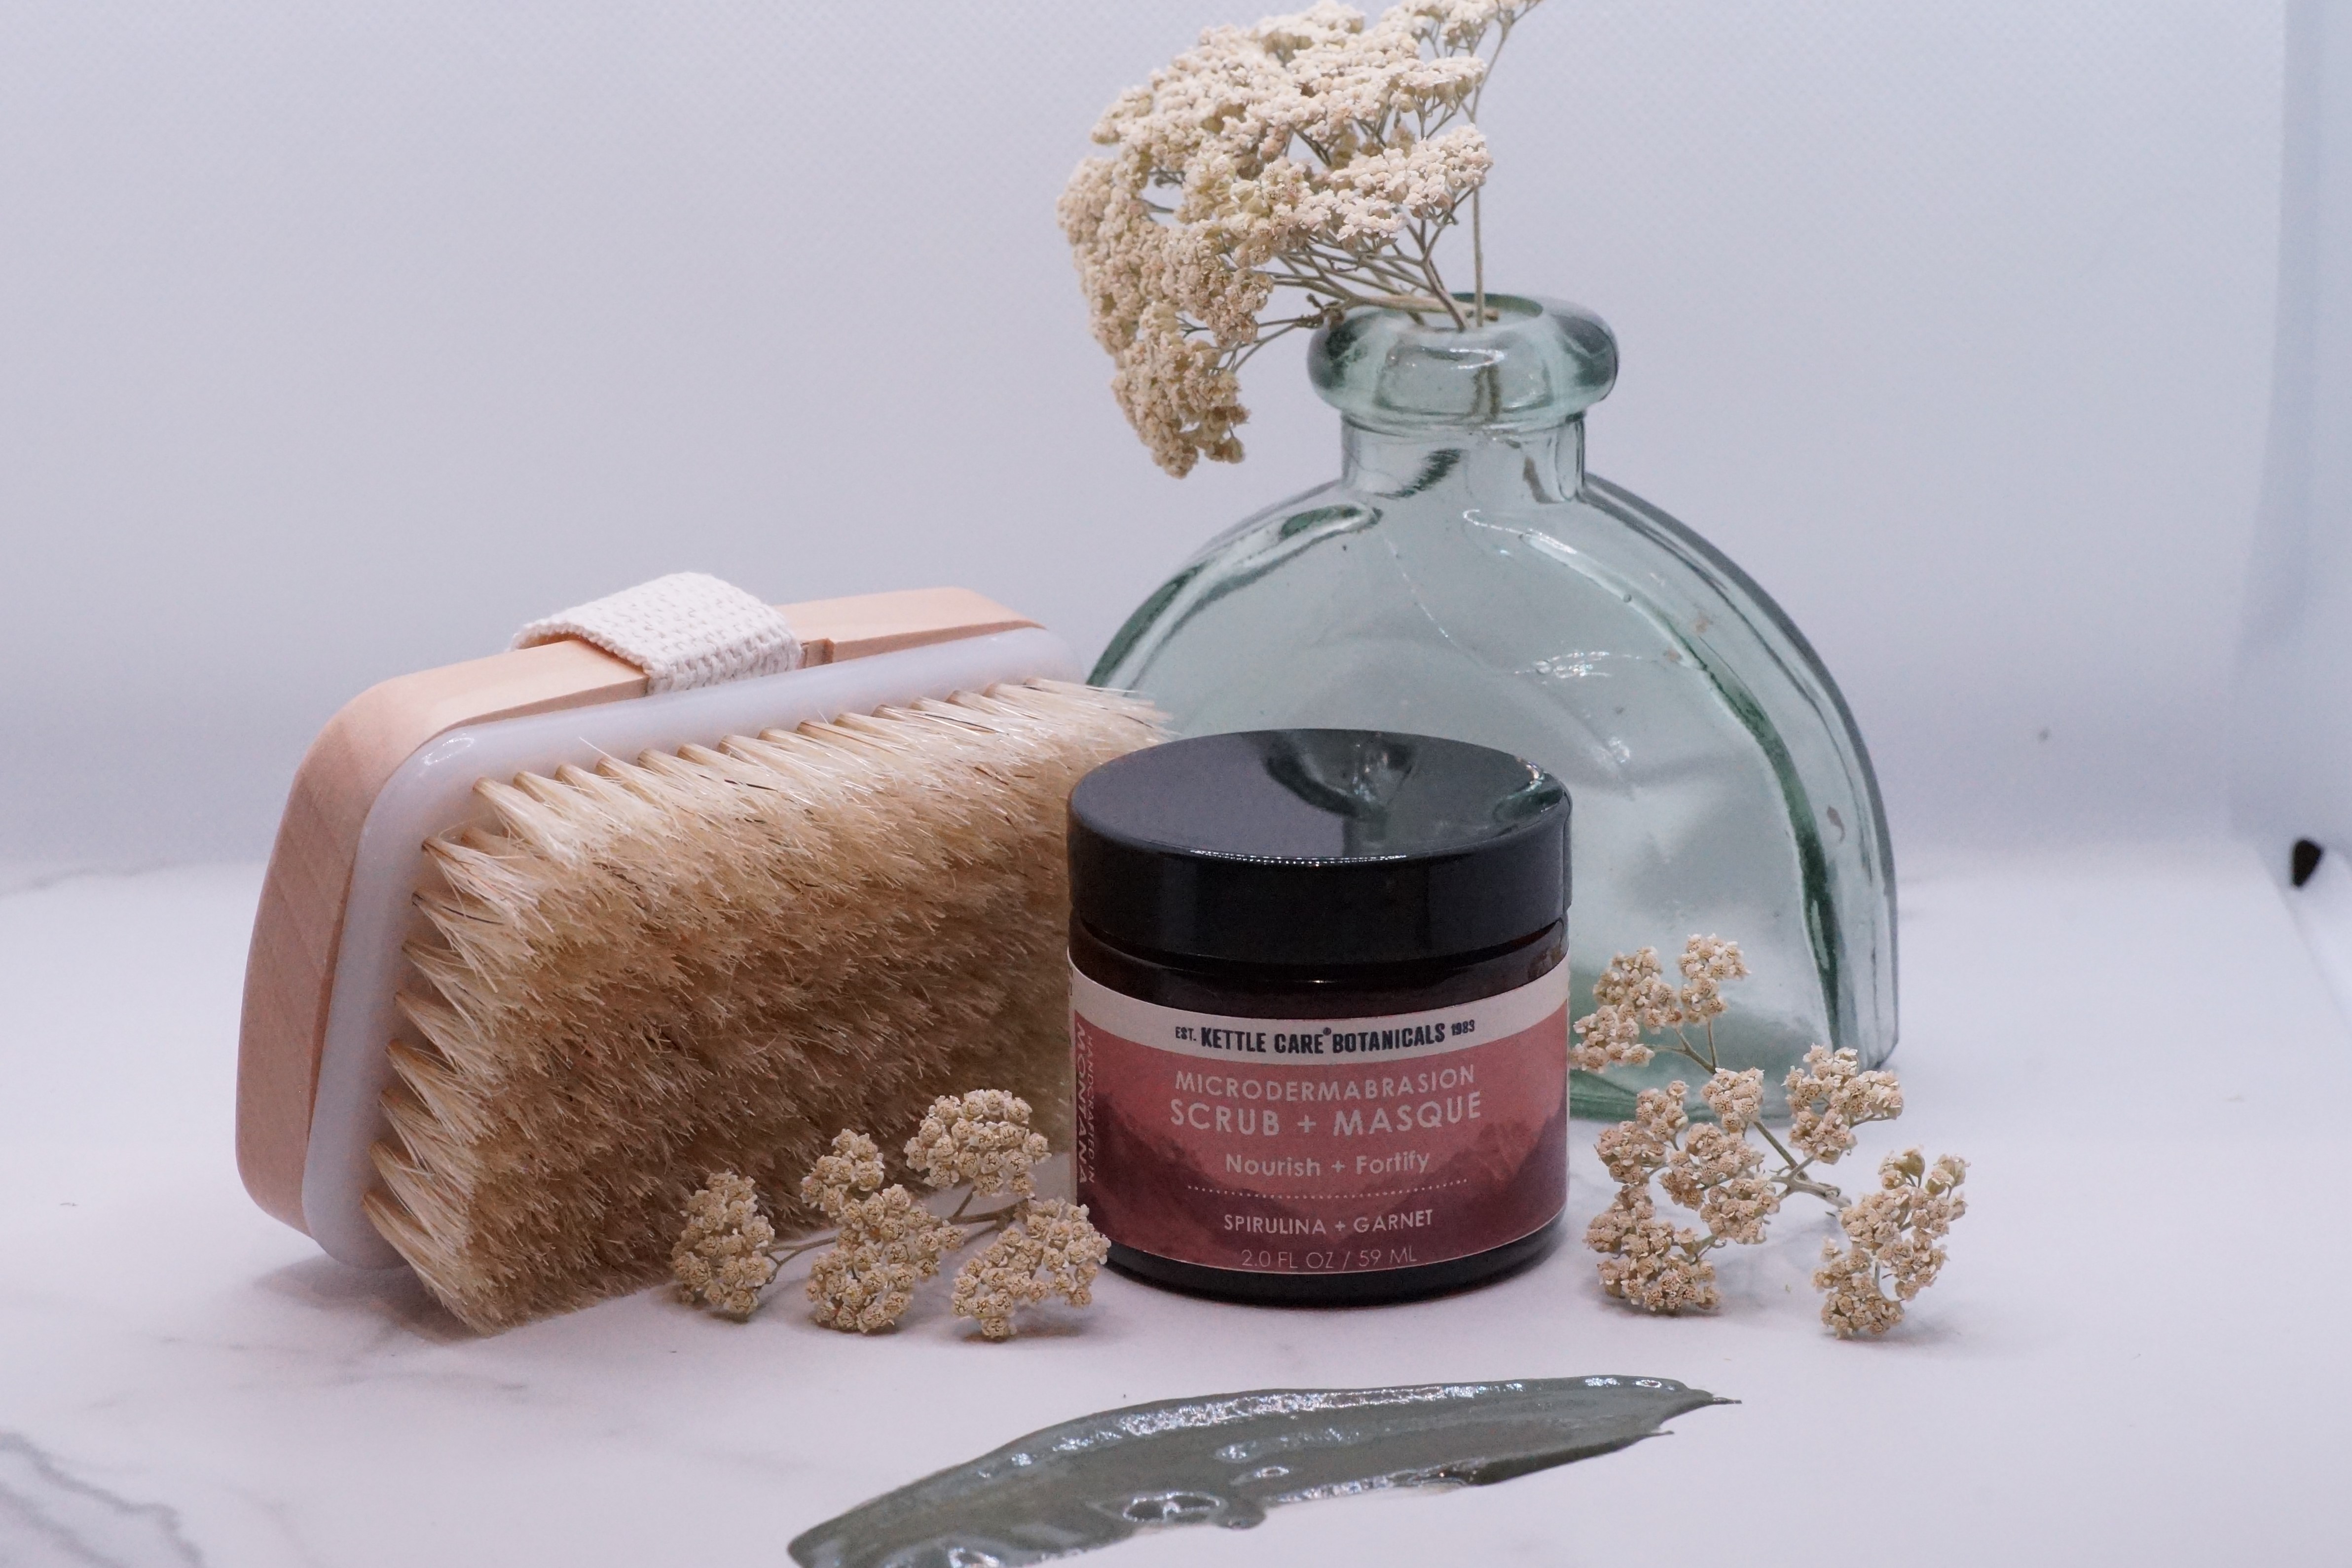 Microdermabrasion Masque and Scrub